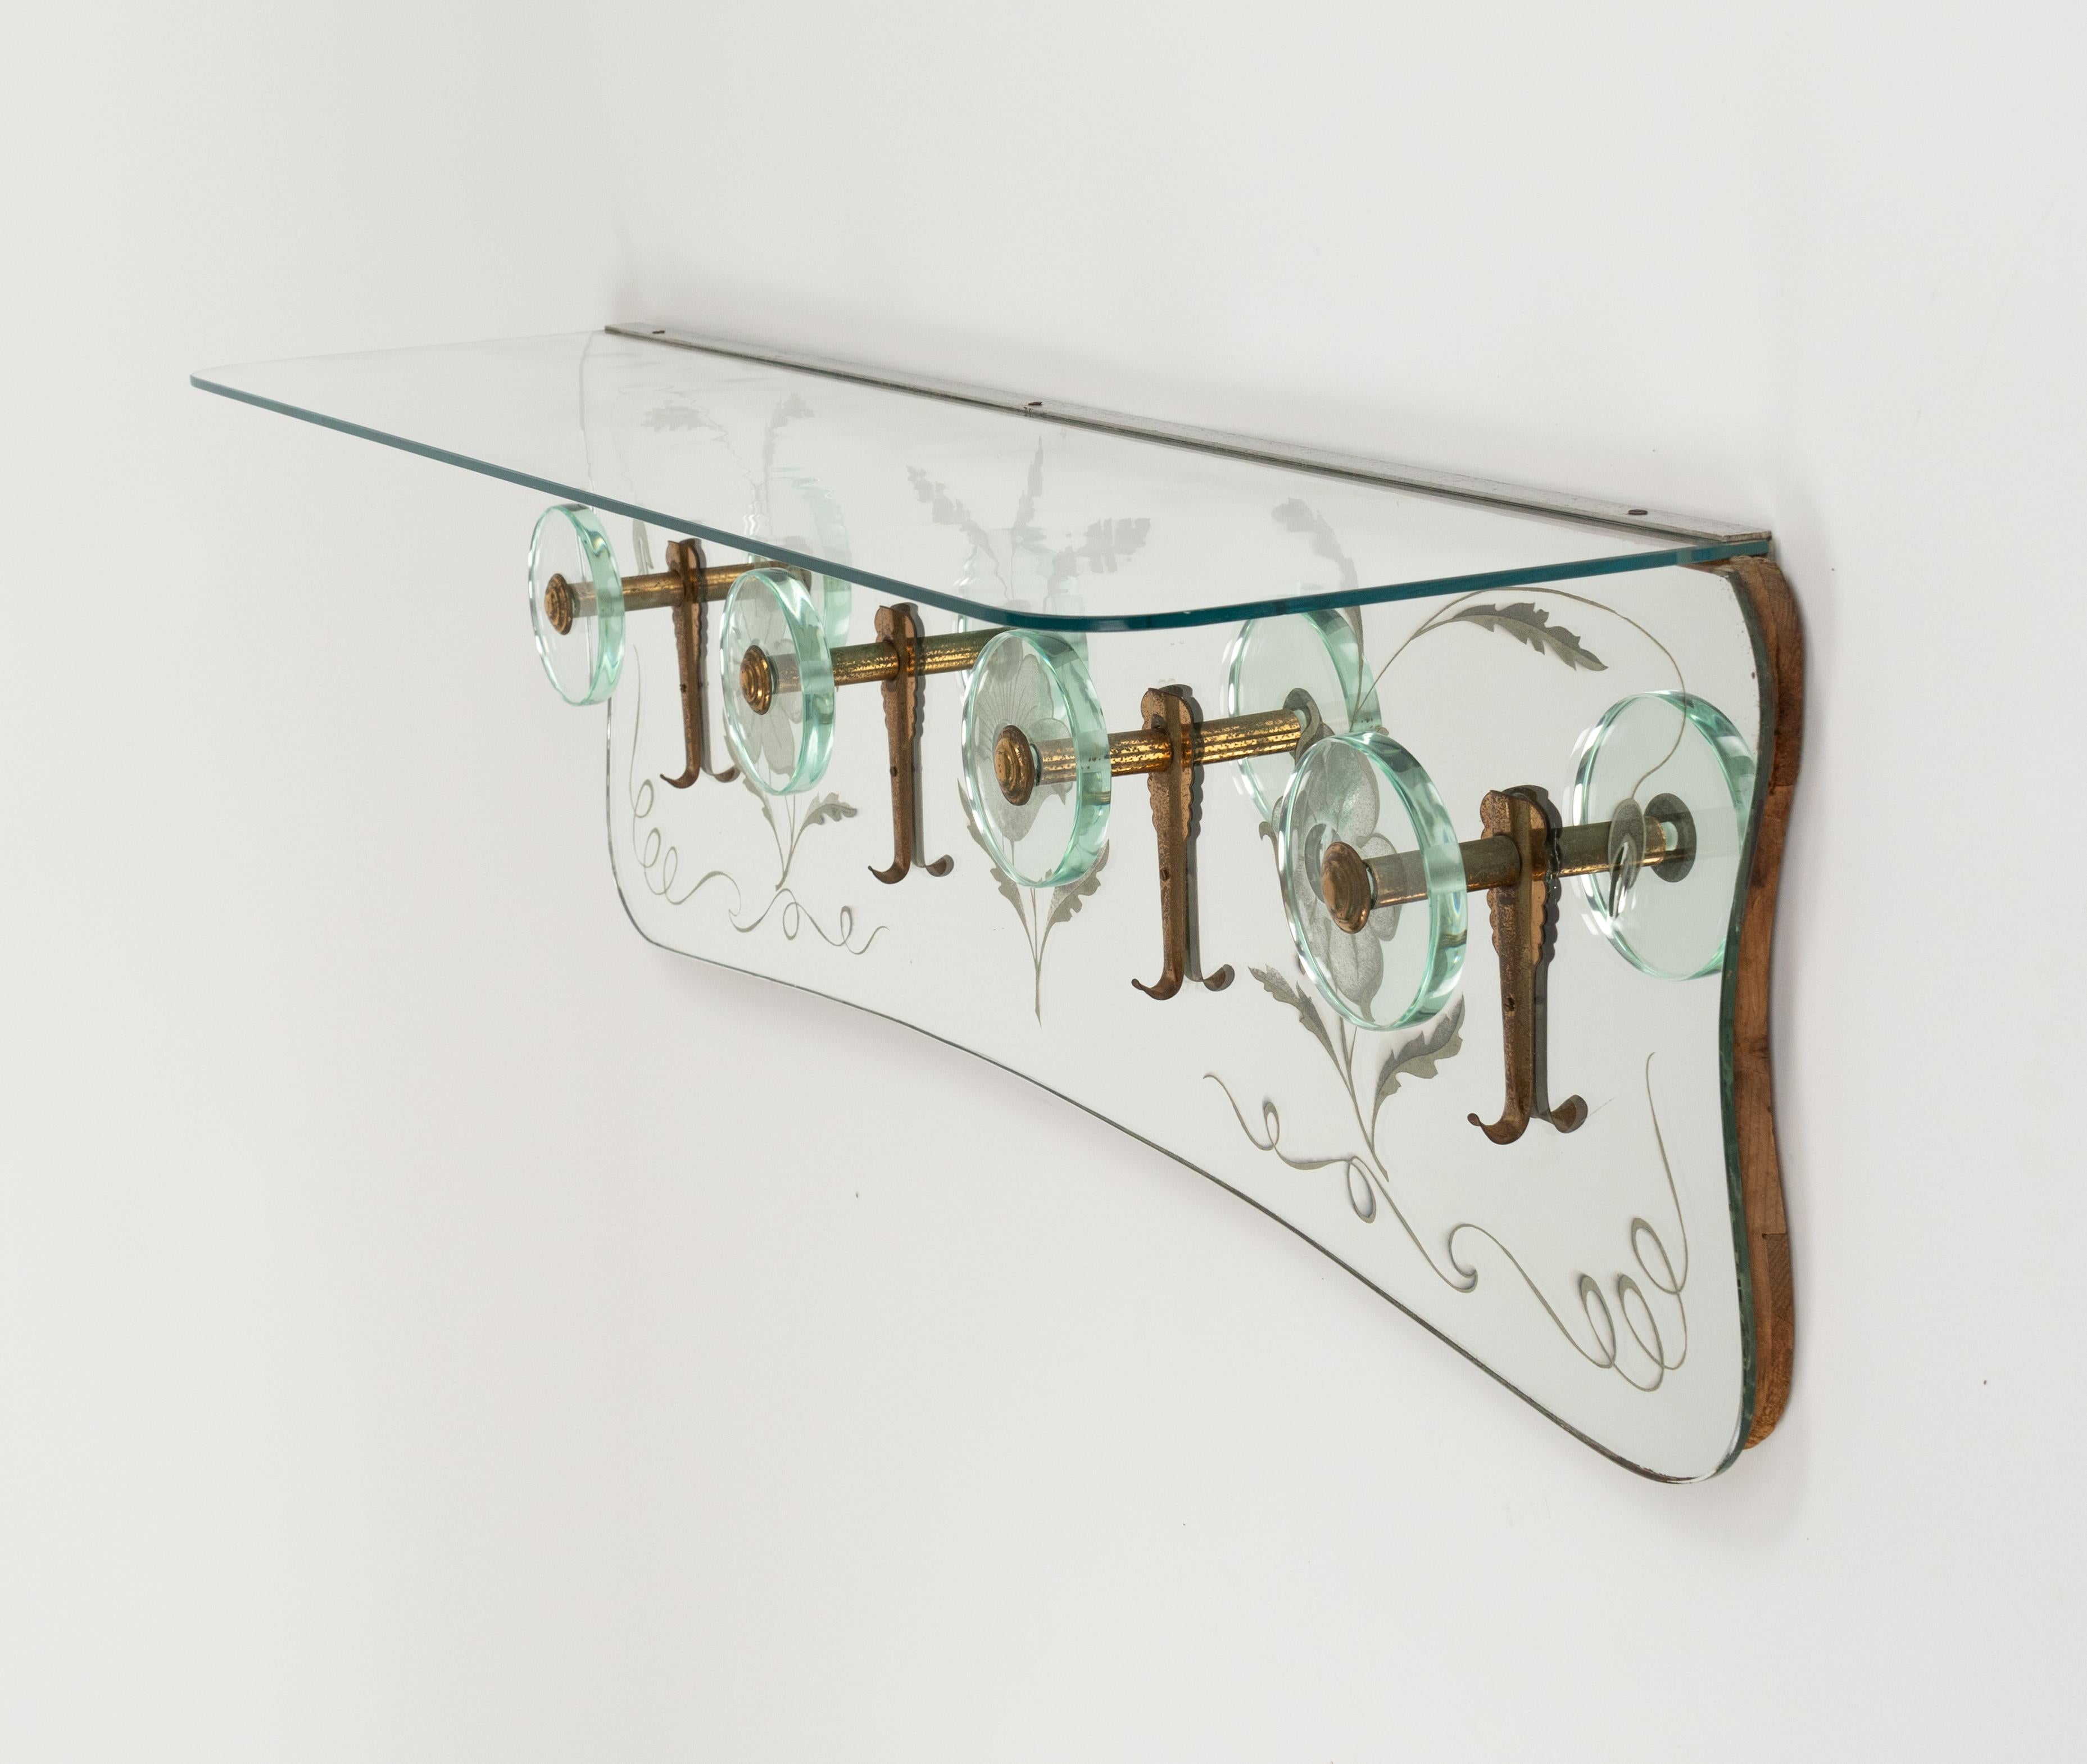 Midcentury Coat Rack Shelf in Mirror, Brass & Glass by Cristal Art, Italy, 1950s For Sale 9